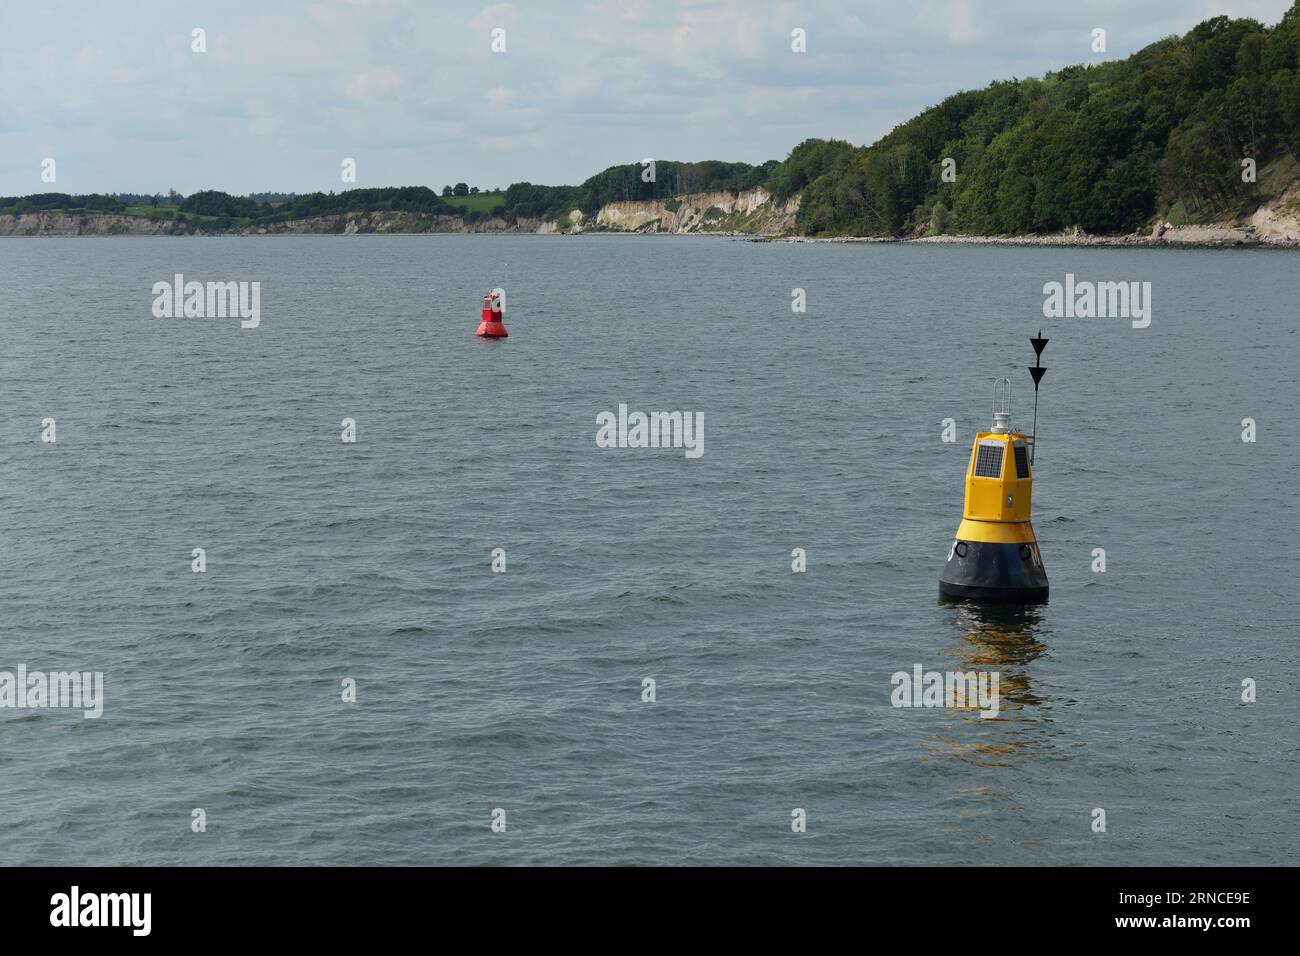 At the head of the Sassnitz Harbor's pier, two buoys are placed to mark the entrance area for ships. Stock Photo